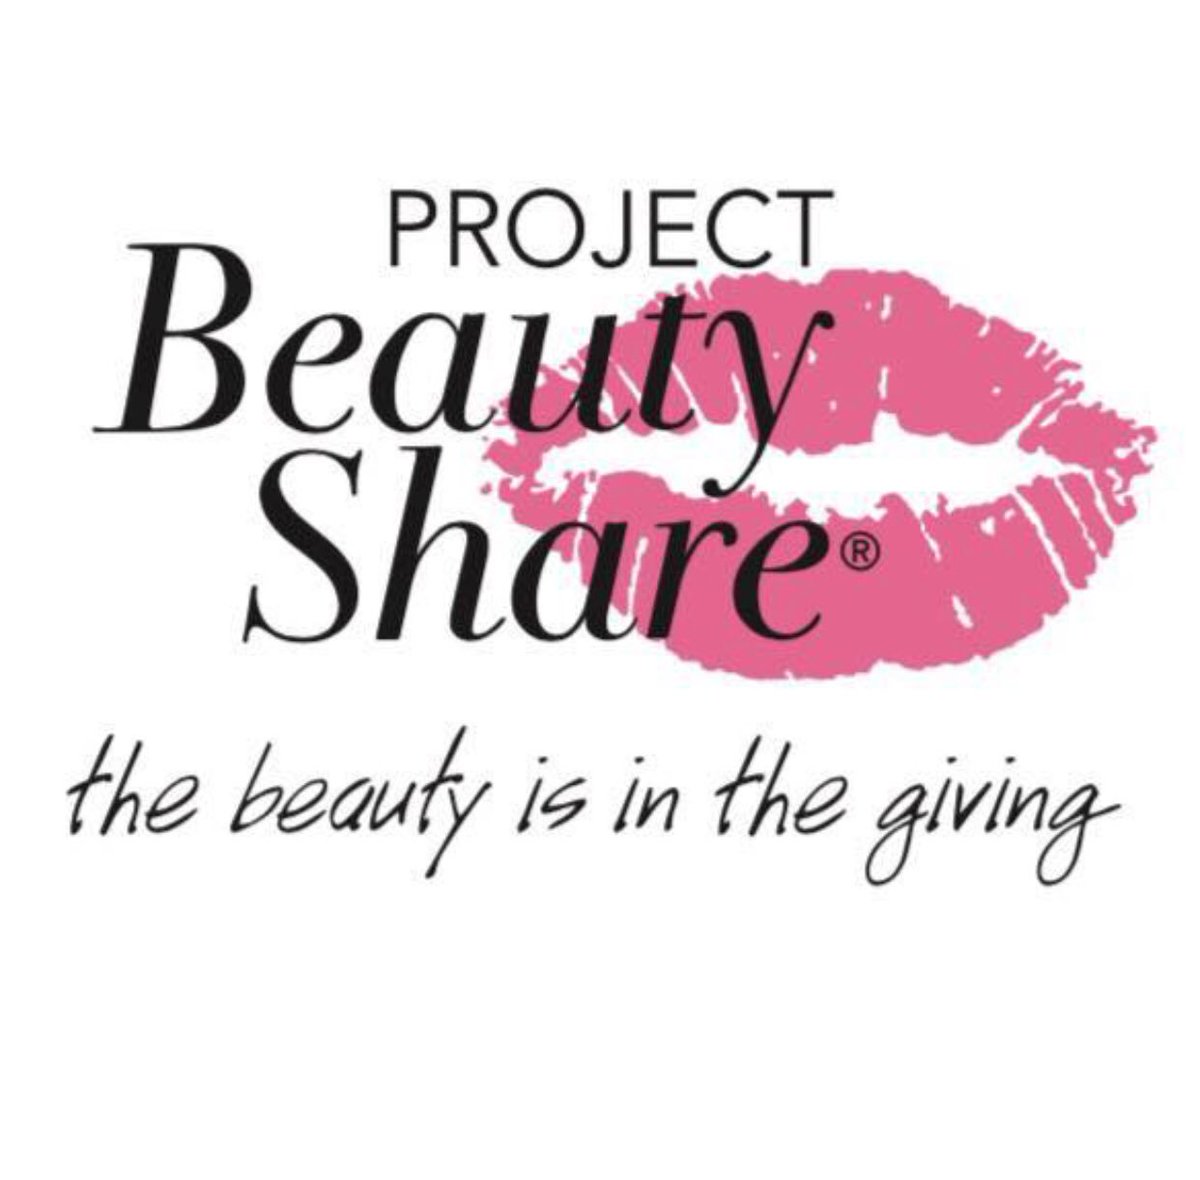 Donation Ideas for Project Beauty Share